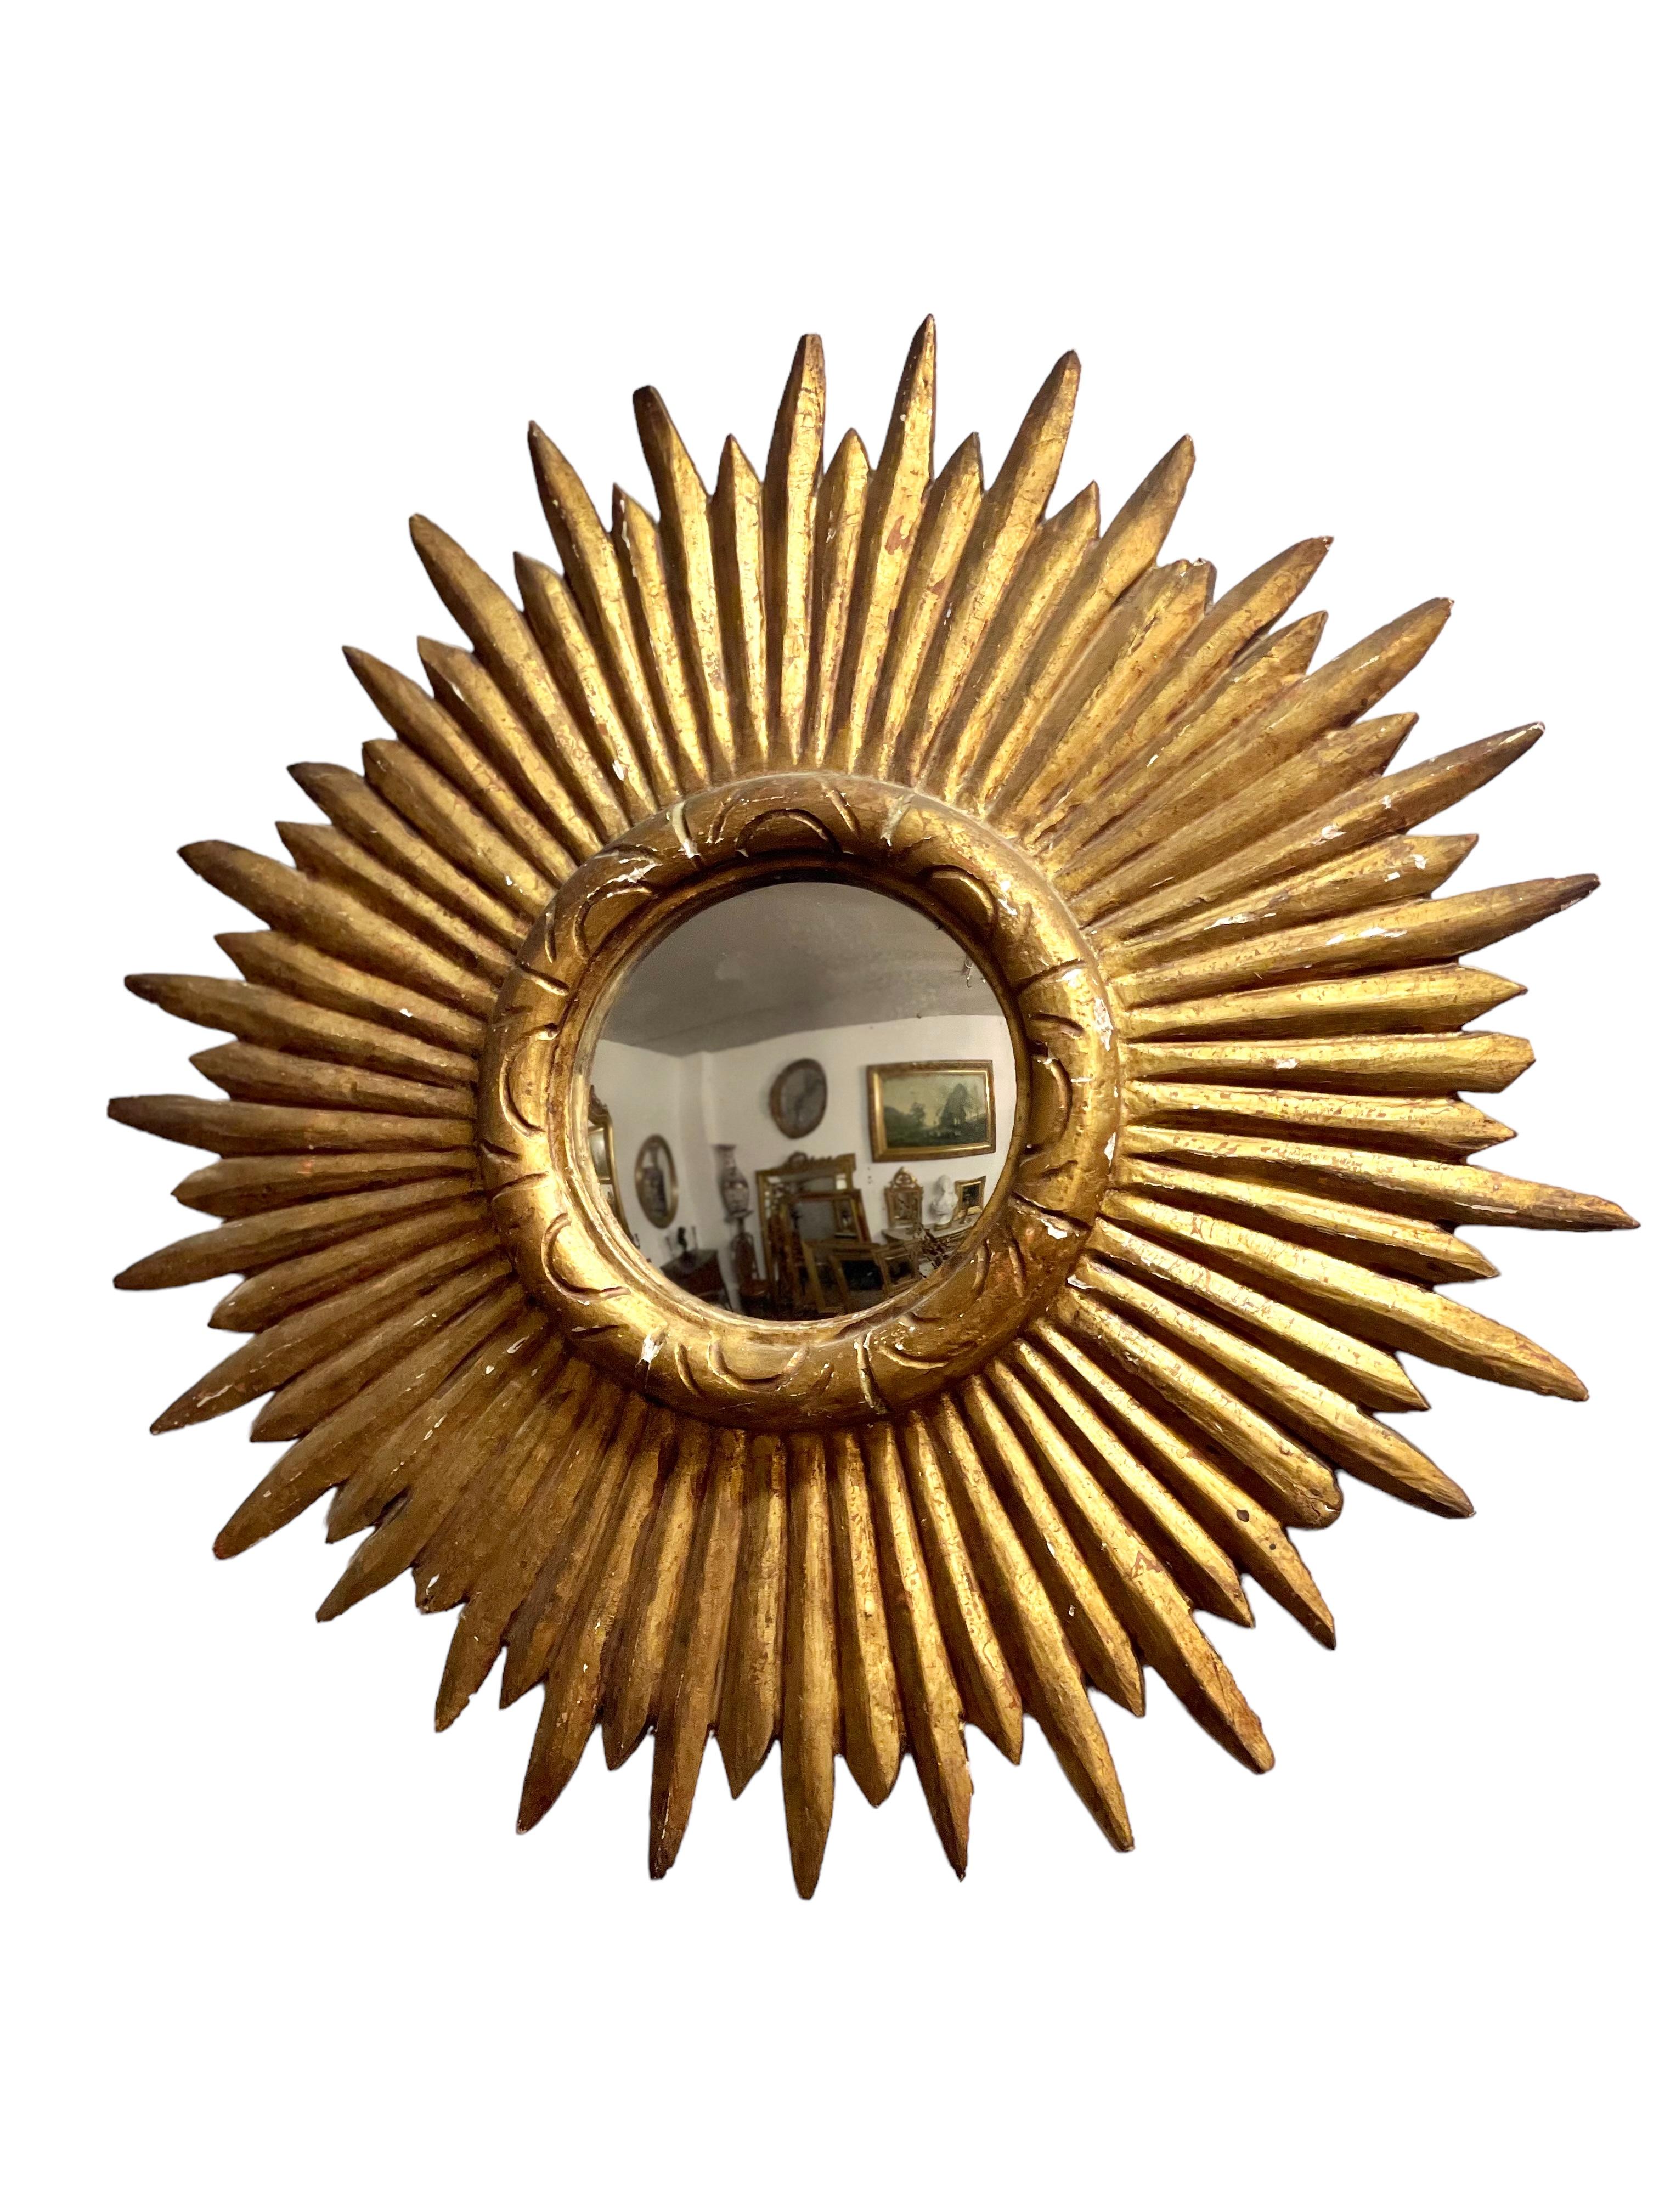 A fabulous midcentury sunburst mirror, with the original gilt finish on the finely carved wooden feathered rays, and a circular, light diffusing convex mirror within. A truly stunning piece, this would add a delightfully stylish gleaming accent to